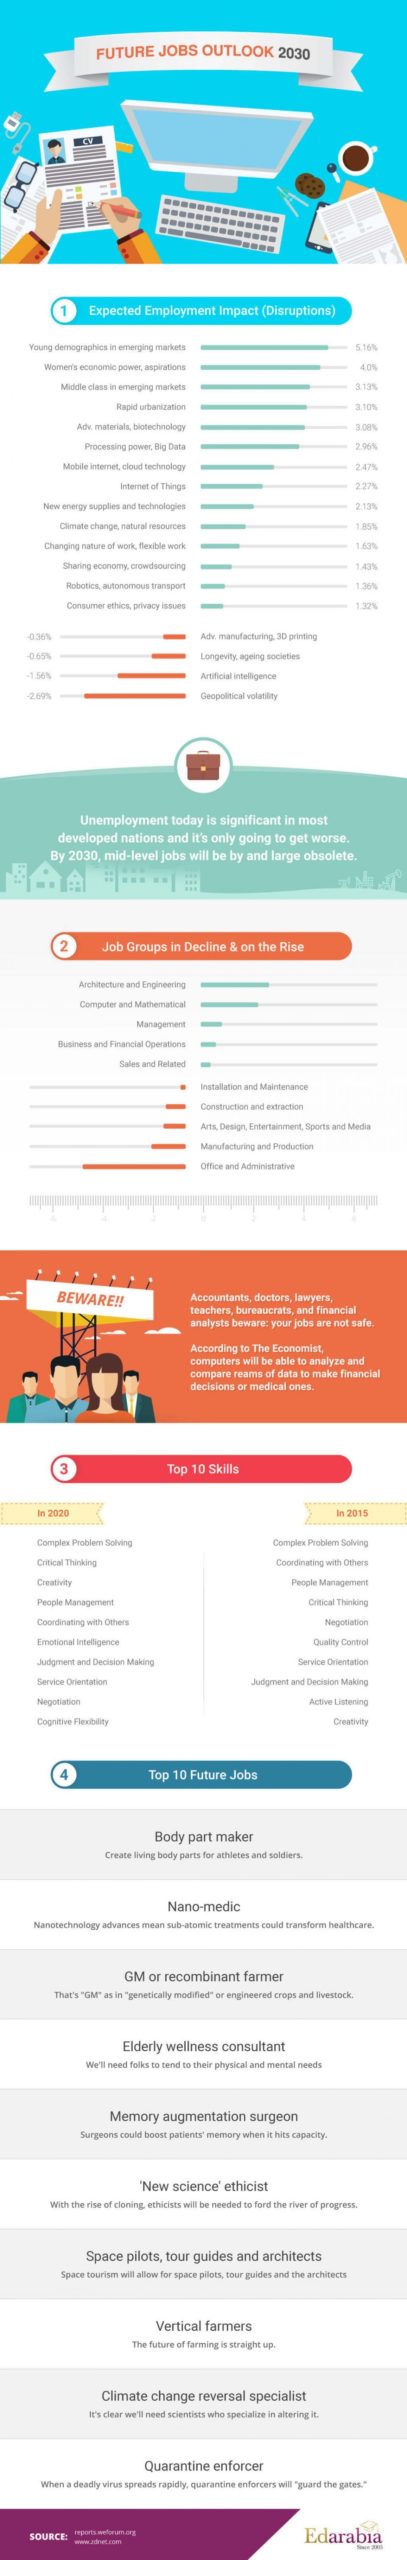 Top 10 Jobs And Work Skills 2030